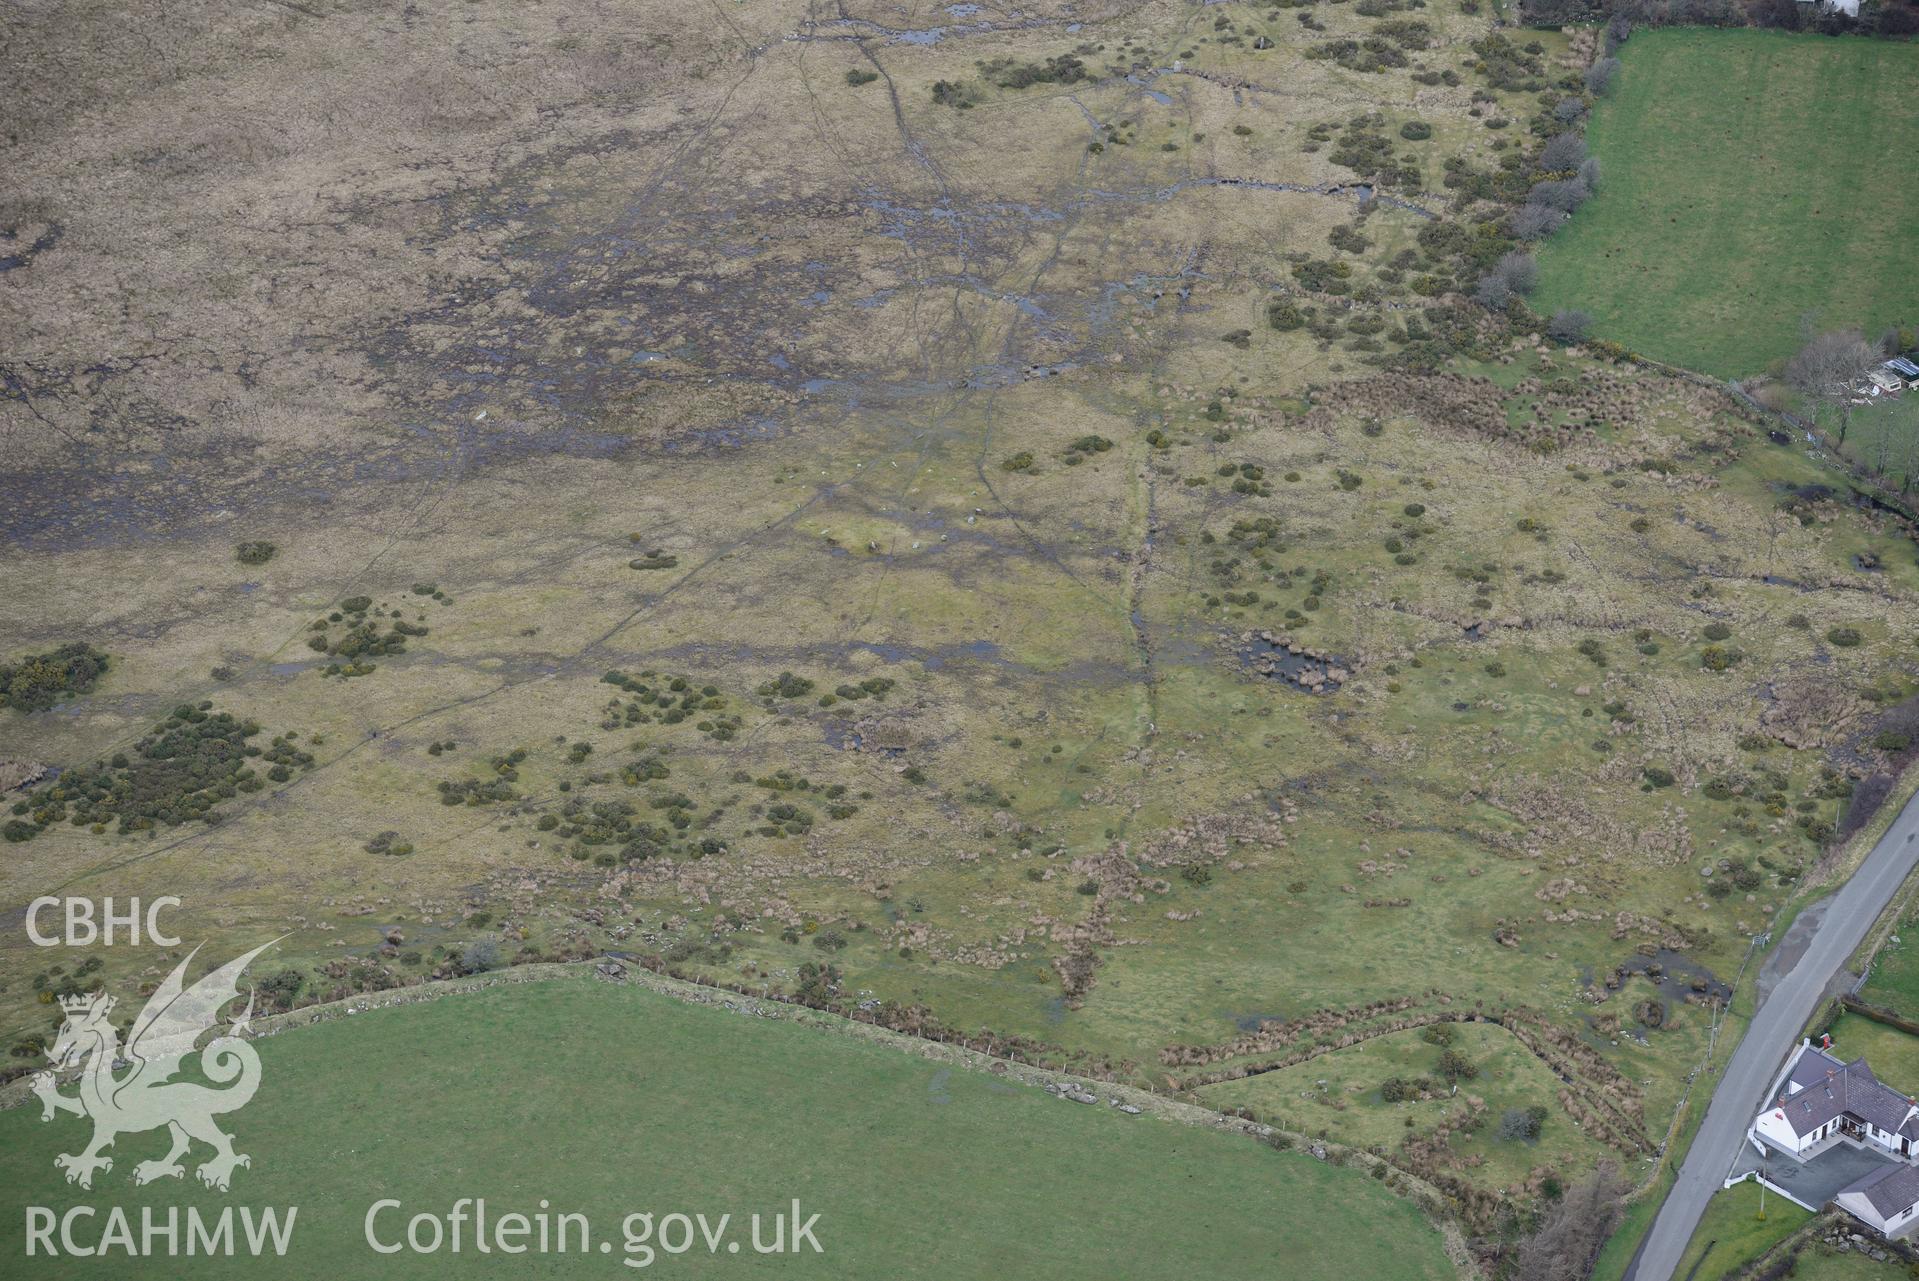 Gors Fawr stone circle, near Crymych. Oblique aerial photograph taken during the Royal Commission's programme of archaeological aerial reconnaissance by Toby Driver on 13th March 2015.